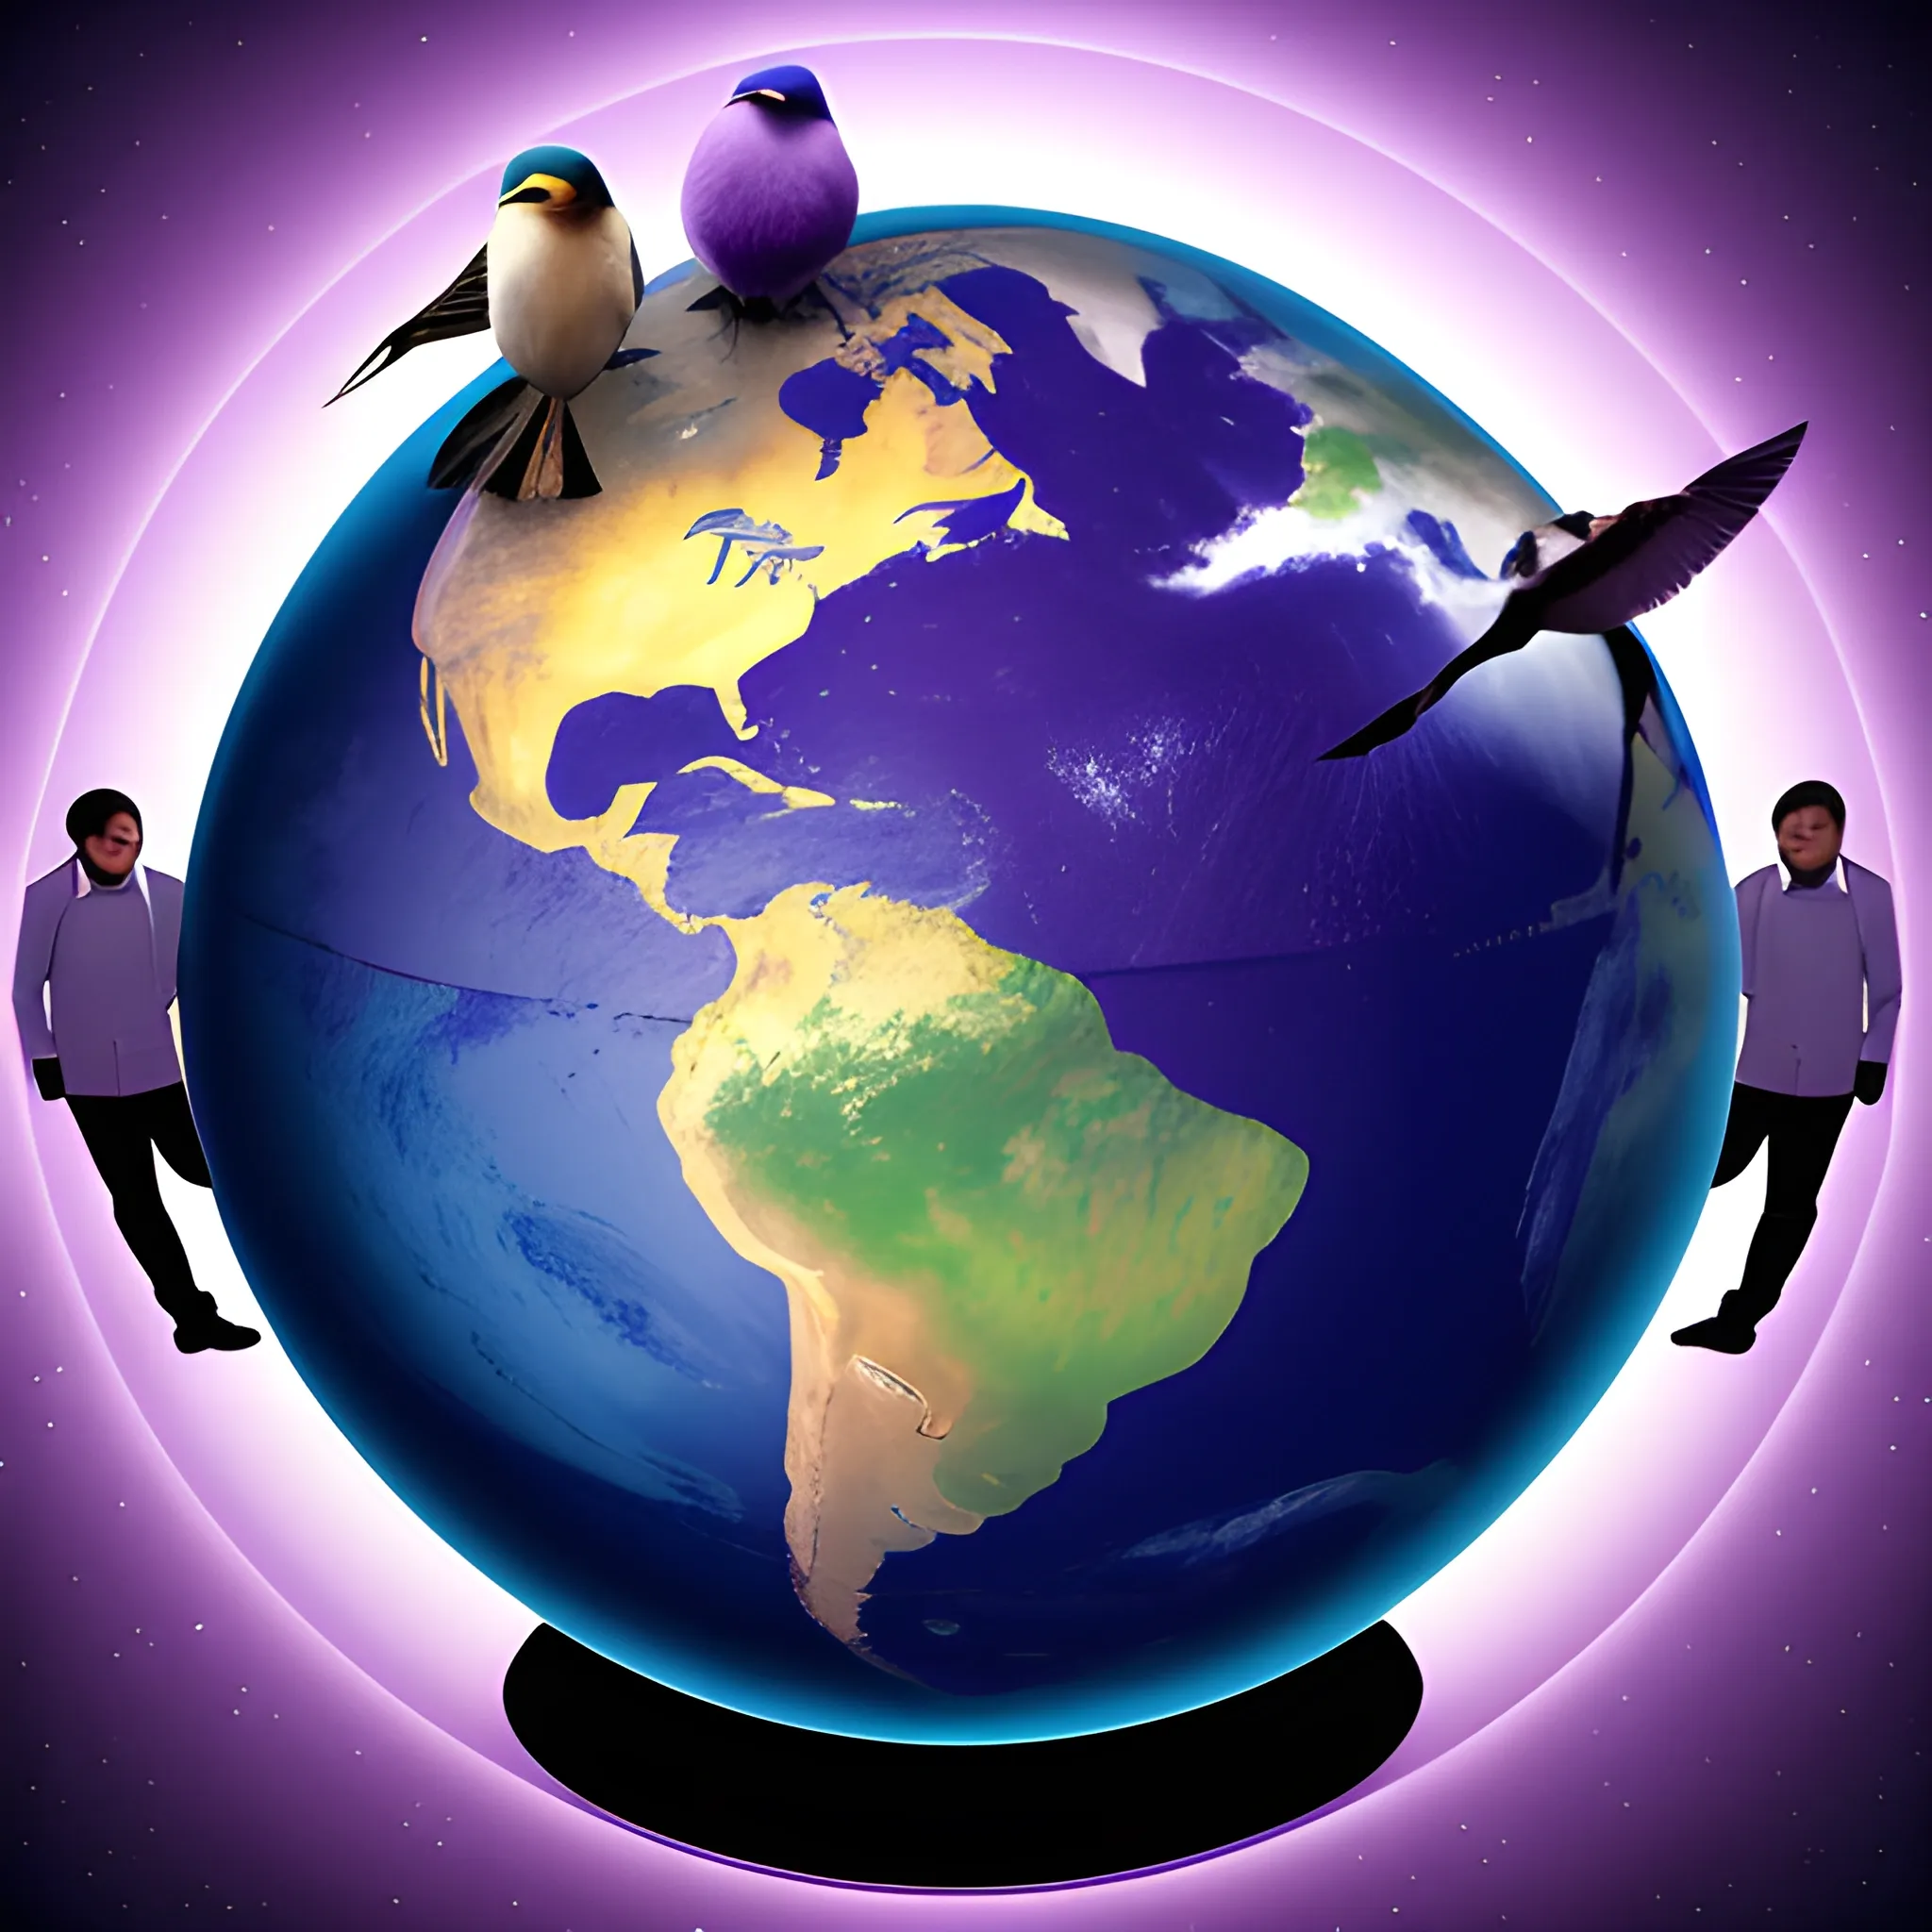 planet earth in a flat view, a man with a suitcase is standing on it, with a restrained look, birds are flying above him, all this is depicted on a purple restrained background